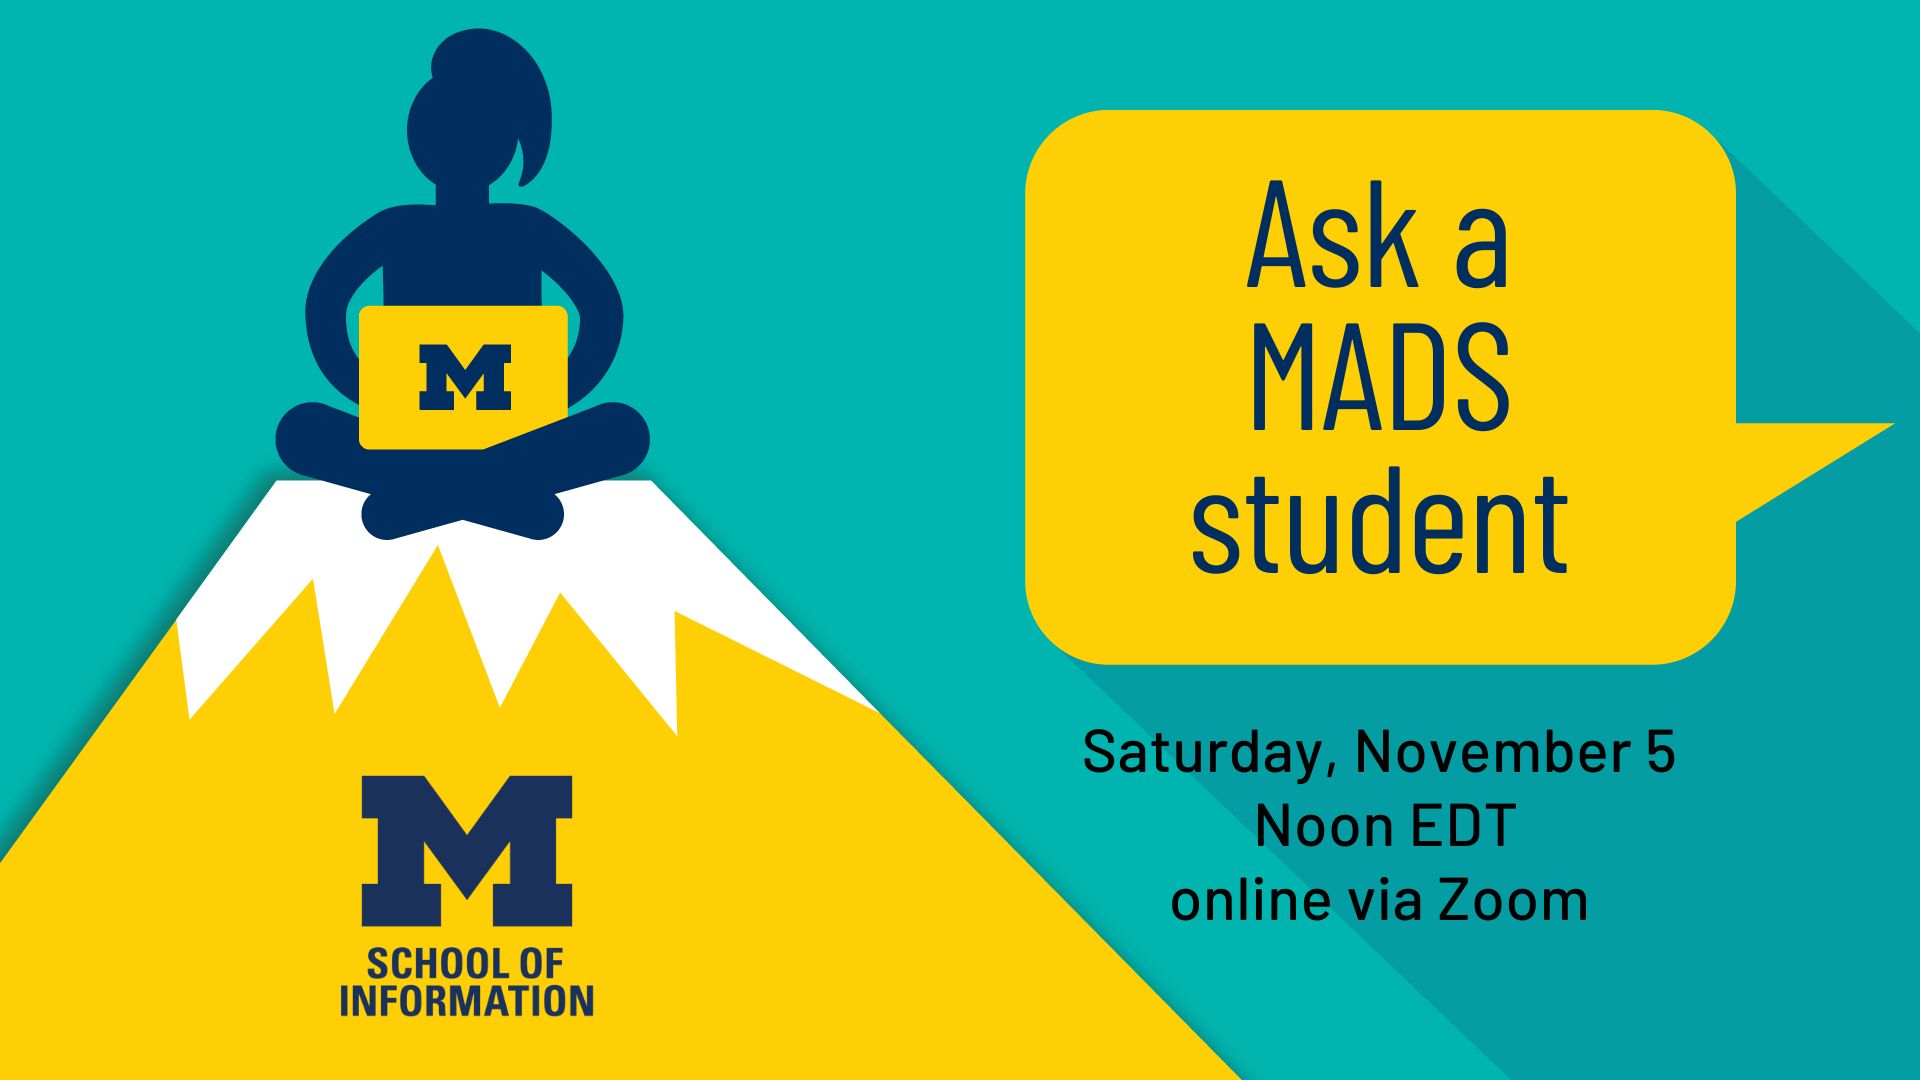 "Ask a MADS student. Saturday, November 5. Noon EDT. online via Zoom."